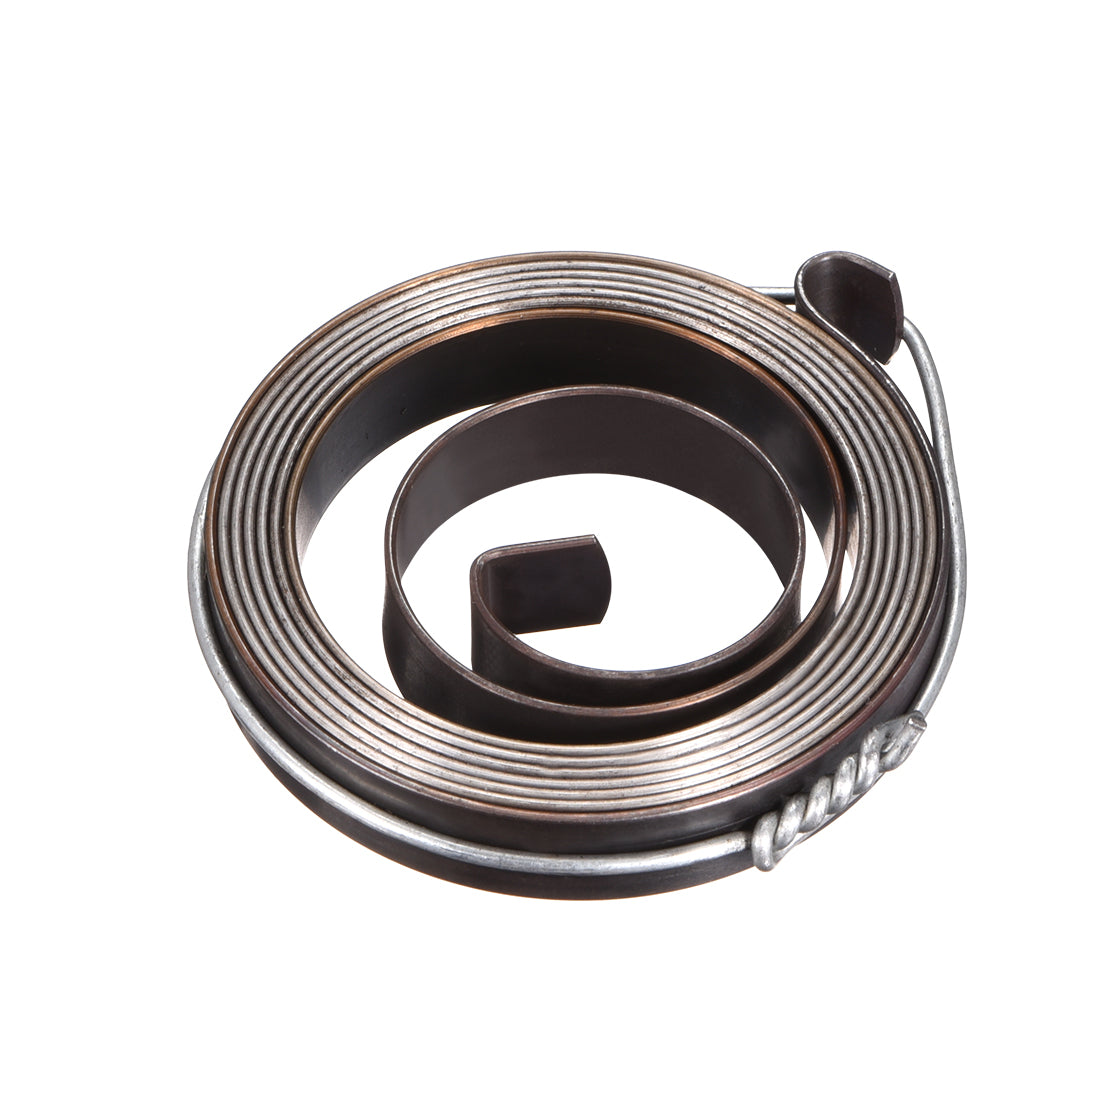 uxcell Uxcell Drill Press Spring Quill Feed Return Coil Spring Blackening 1000mm 41x8x0.8mm